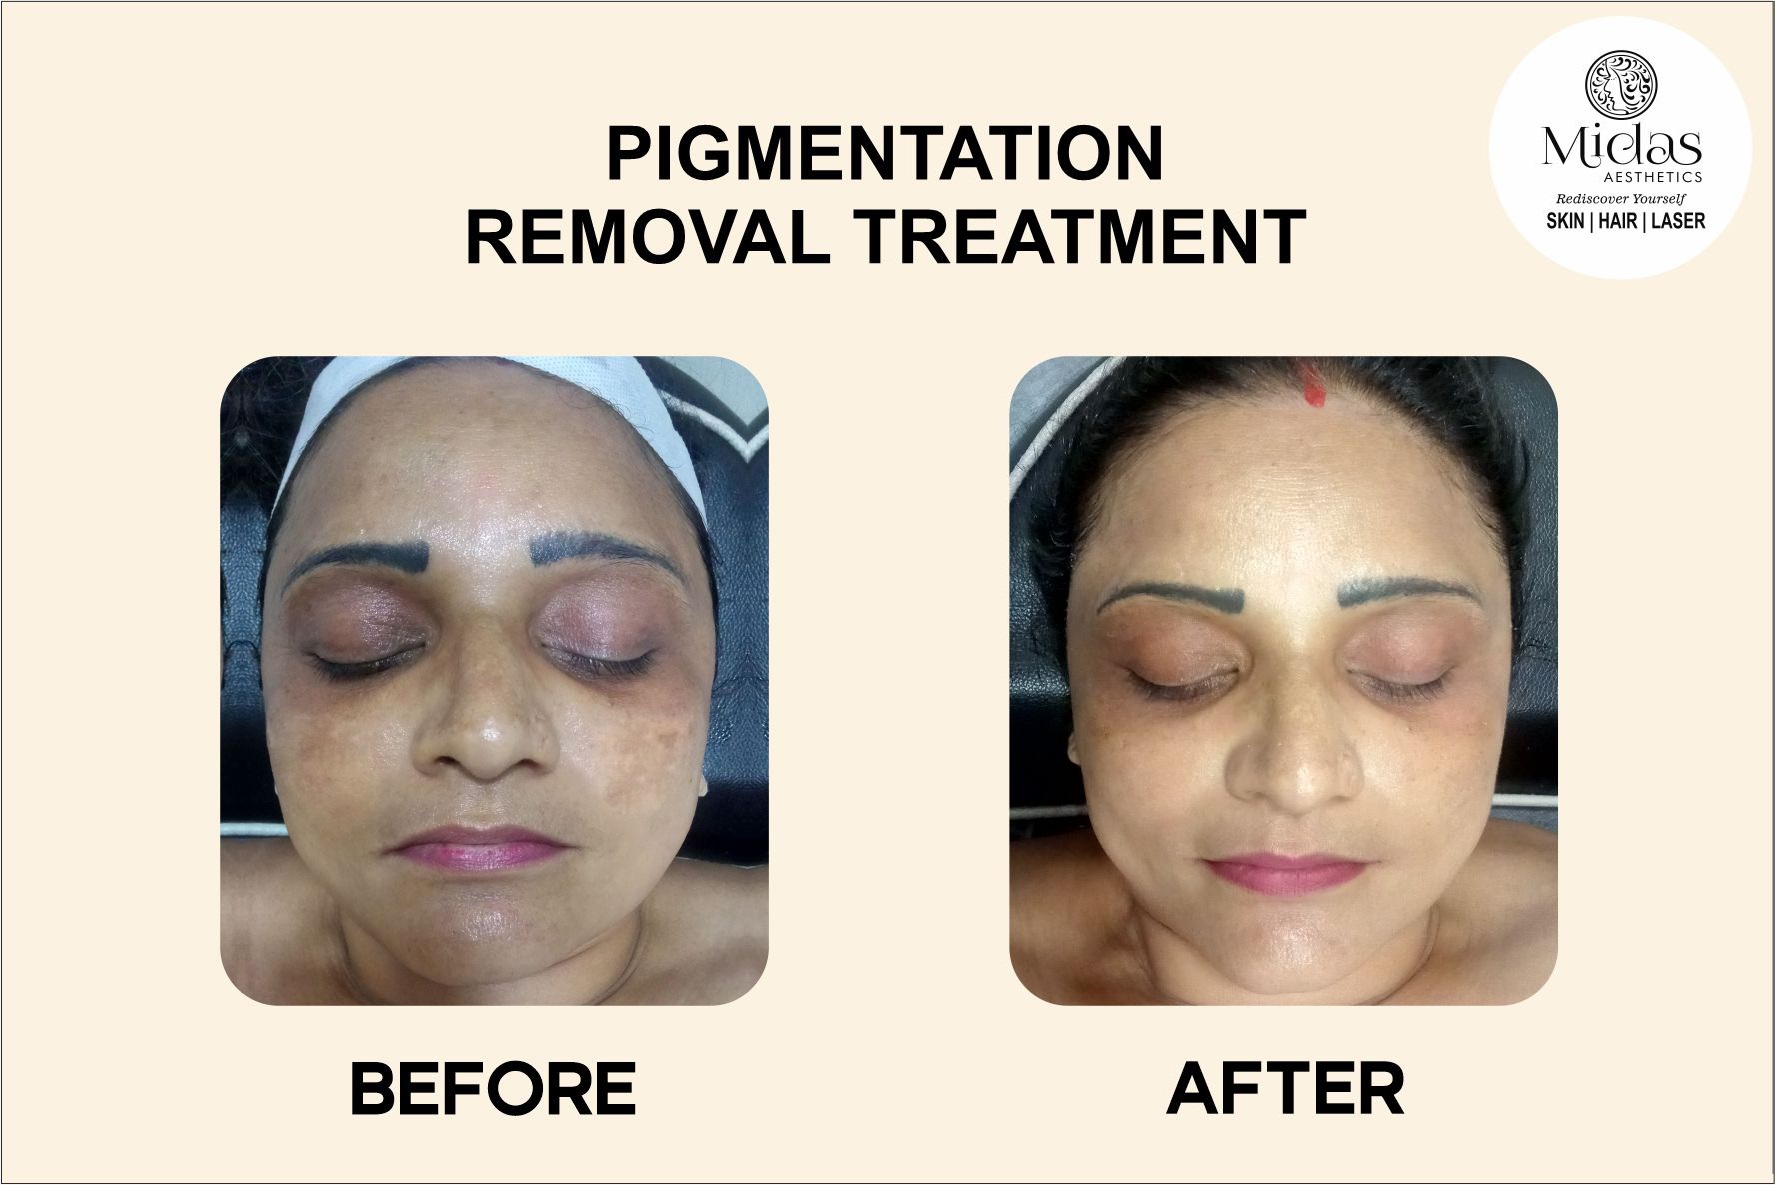 Pigmentation removal treatment before and after images - Laser Treatment for Pigmentation - Midas Wellness Hub